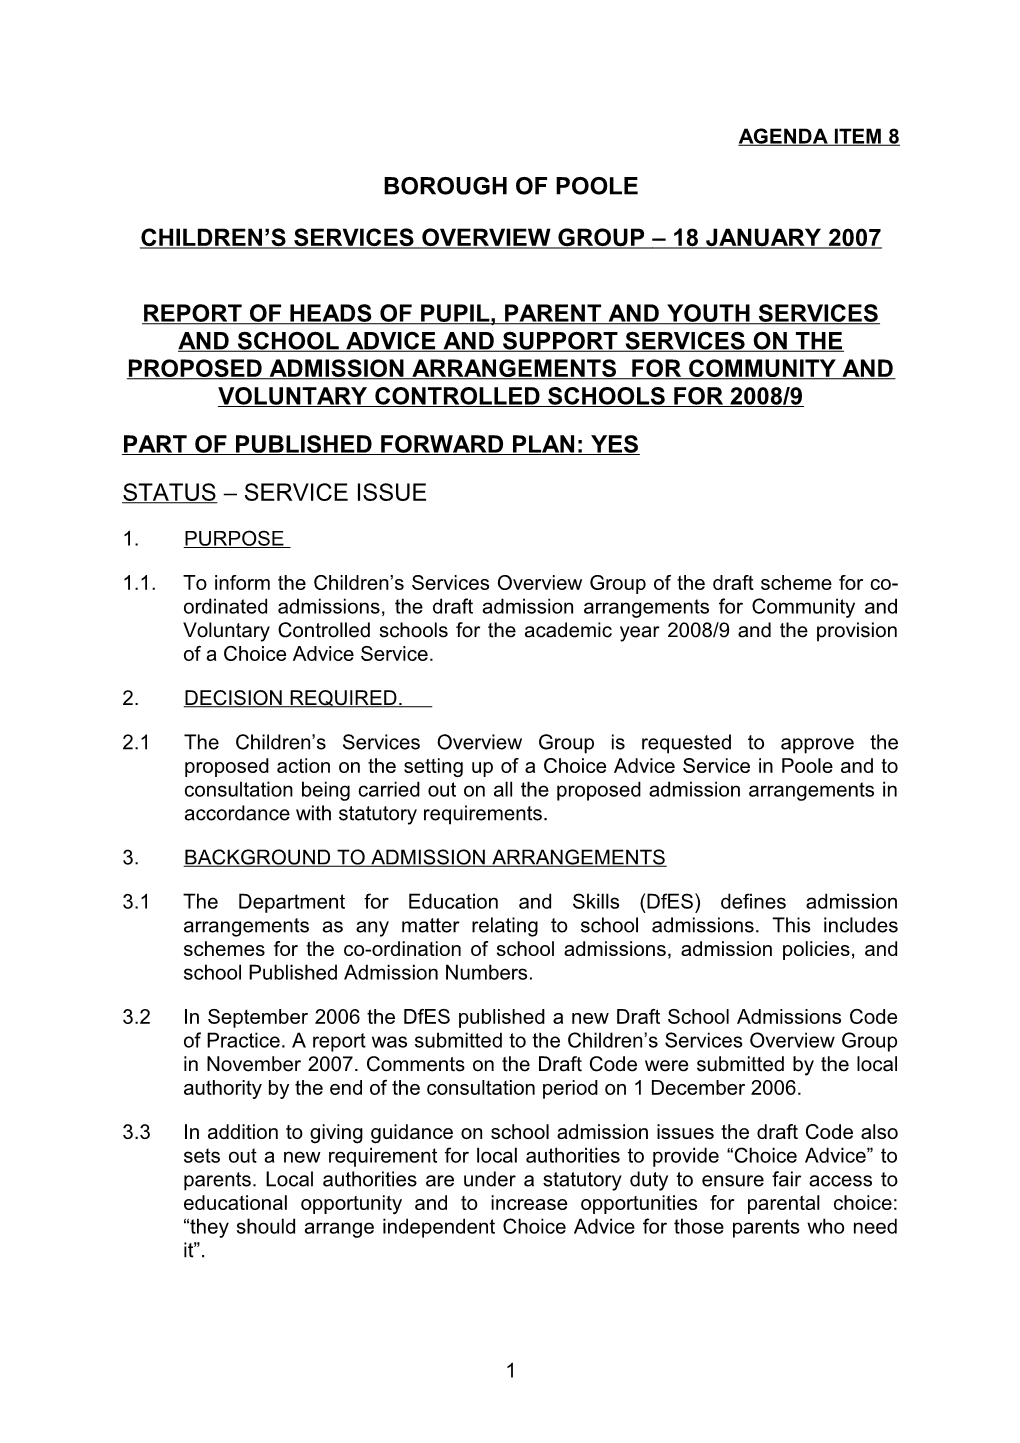 The Proposed Admission Arrangements for Community and Voluntary Controlled Schools for 2008/9